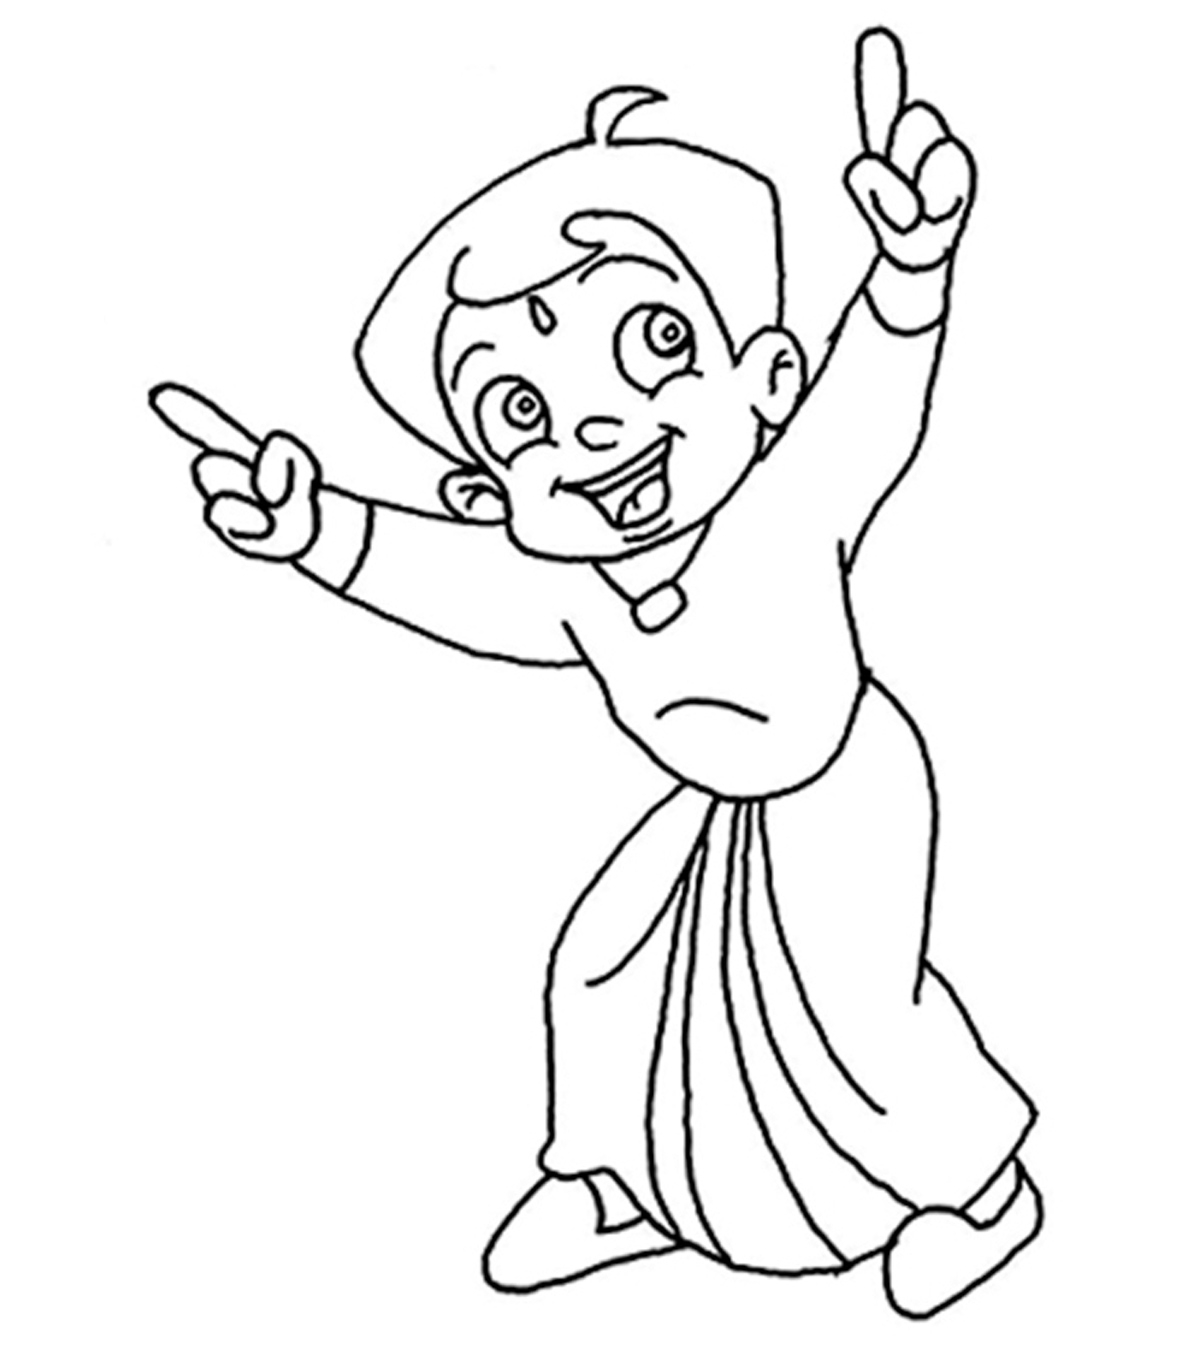 Chota Bheem Coloring Pages Top 25 Free Printable Chota Bheem Coloring Pages Online